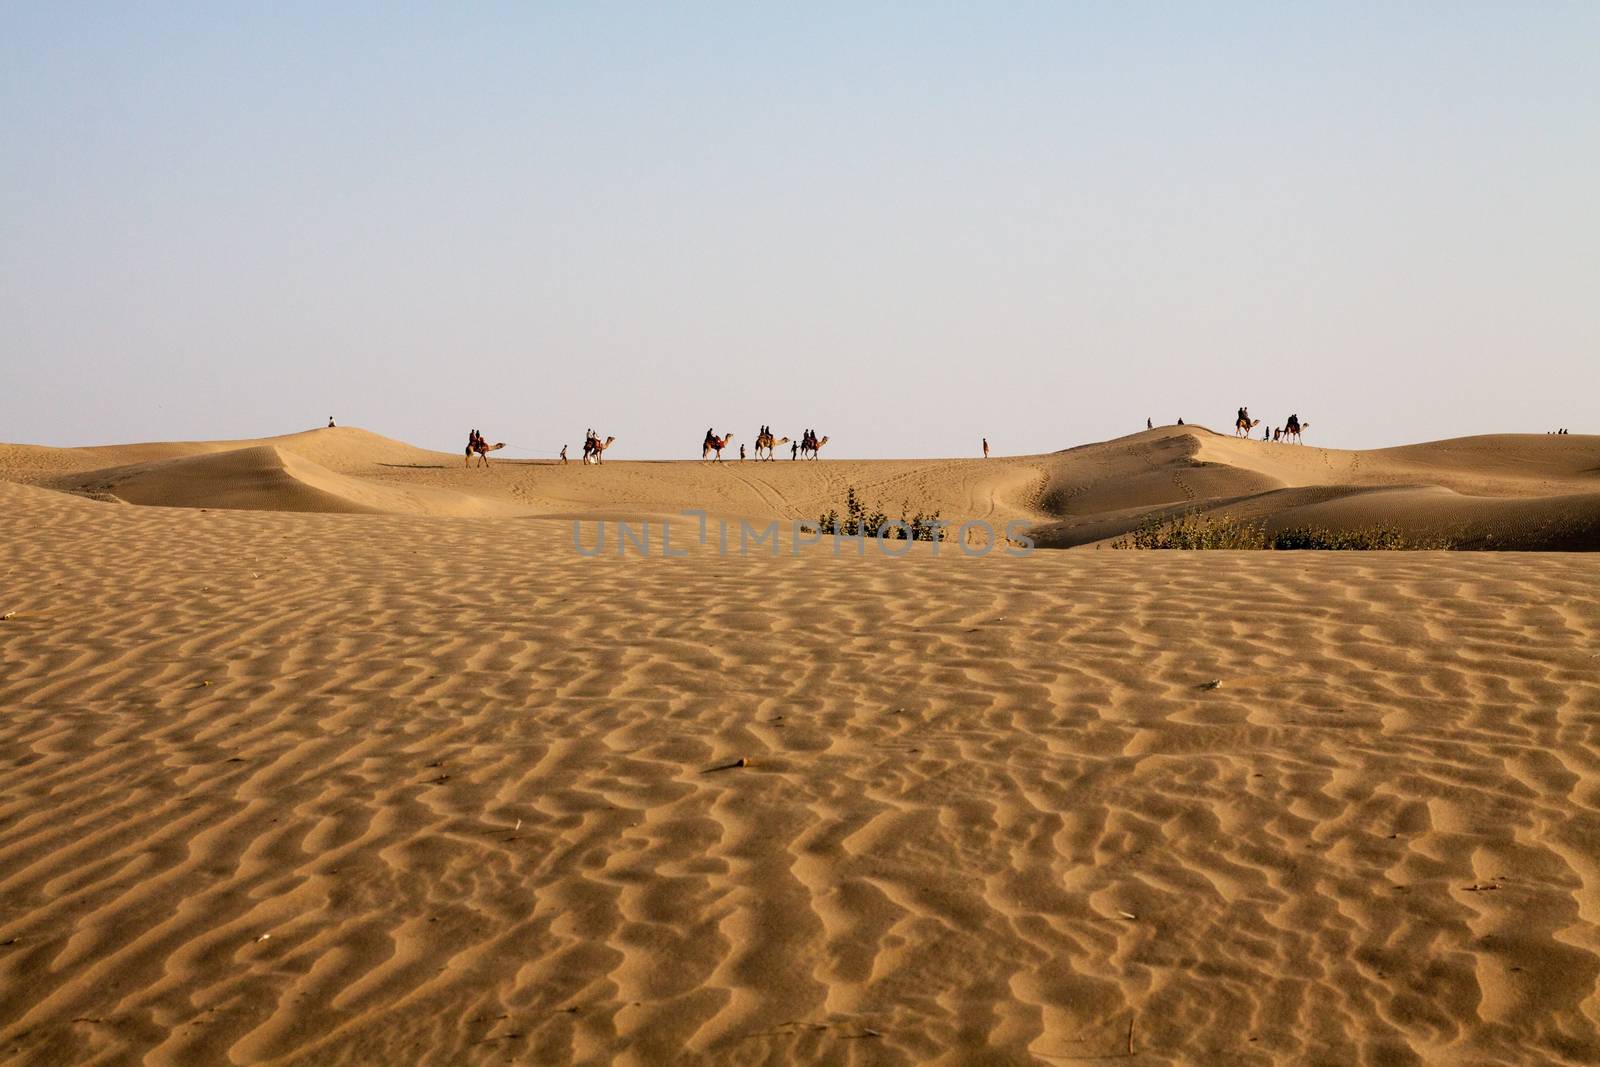 Caravan of camels and People on foot in evening light seen along the horizon with sand dunes in foreground and blue sky above